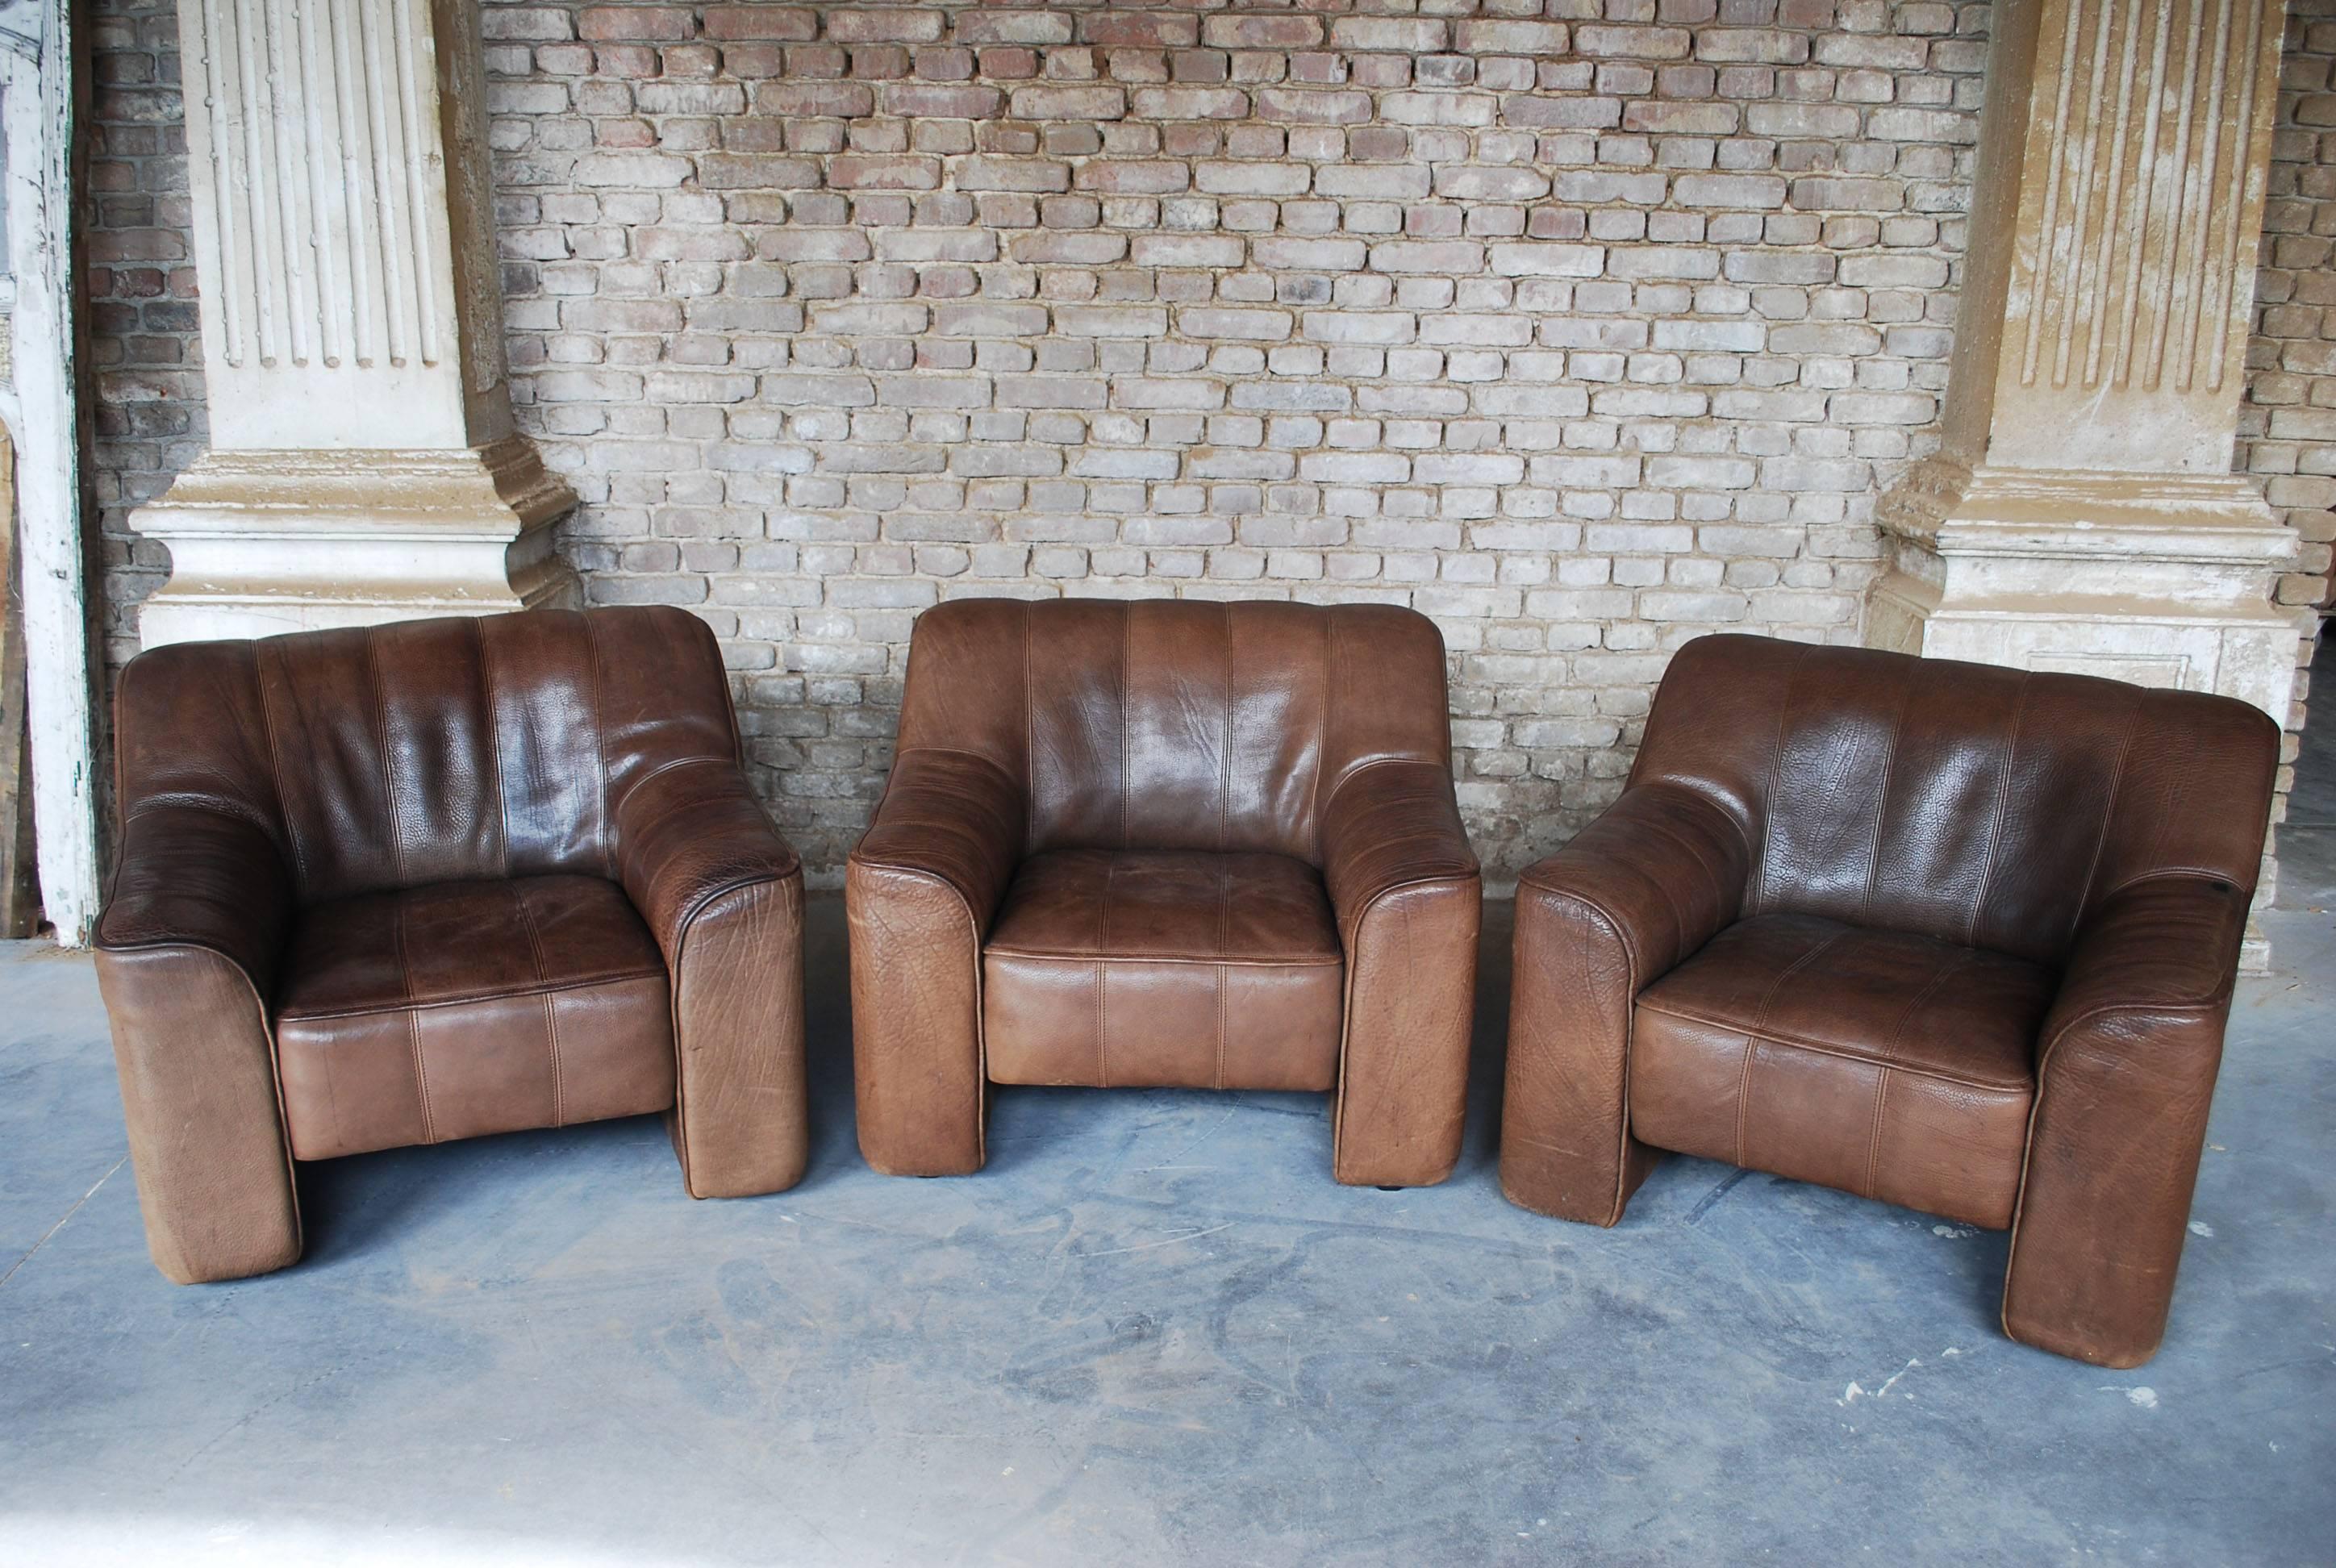 Set of three lounge chairs and one ottoman made by De Sede.
Beautiful thick buffalo neck leather
Chairs are extendable.
Excellent vintage condition.
Dimensions ottoman: 55 x 60 x 35 cm.
(Shipping costs on request, depends on destination).